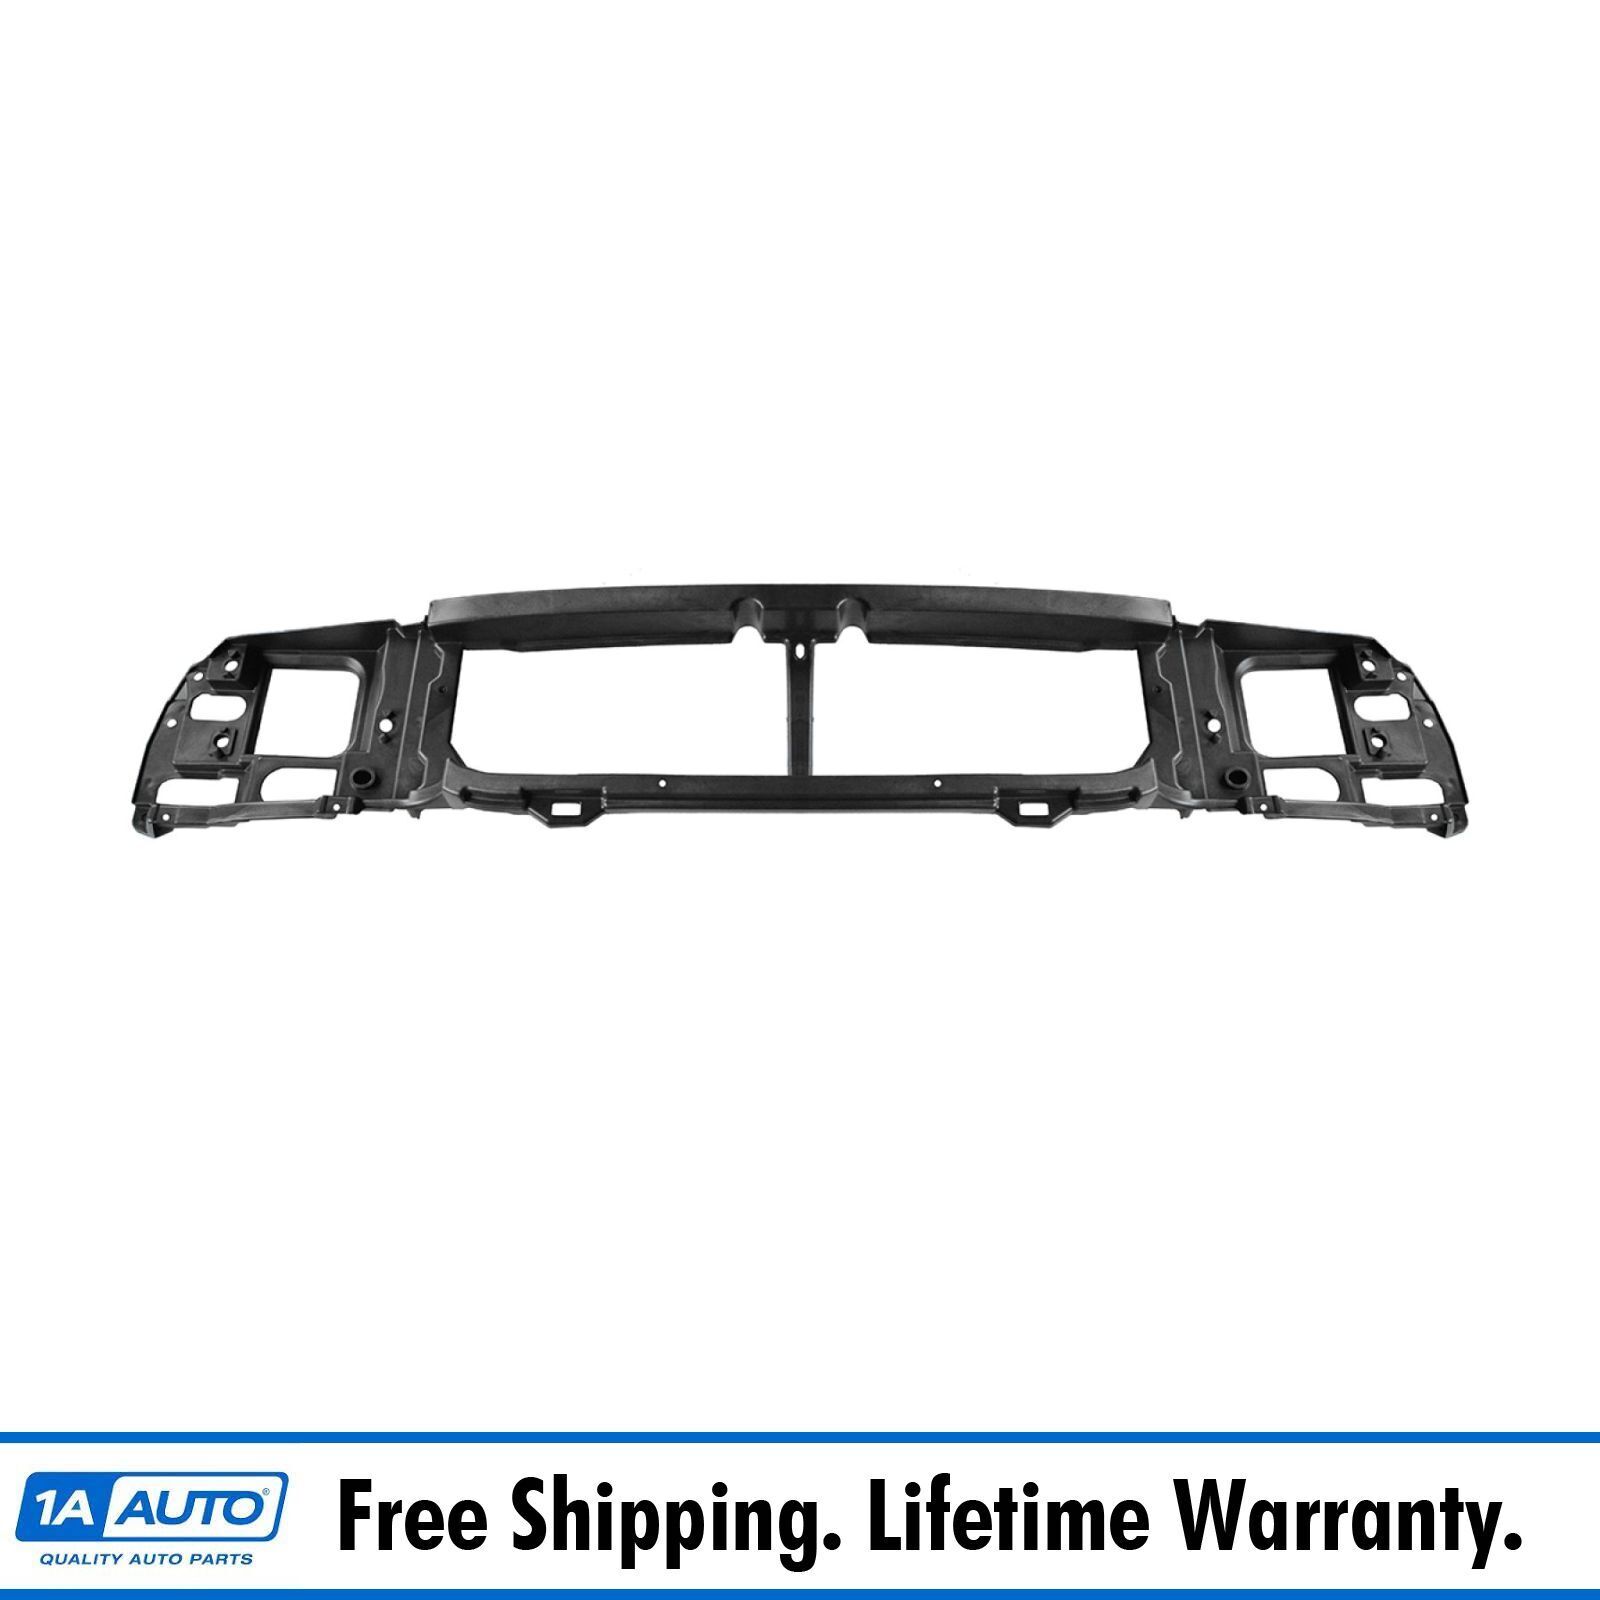 Headlight Mounting Opening Header Grille Grill Panel for 98-00 Ford Ranger Truck